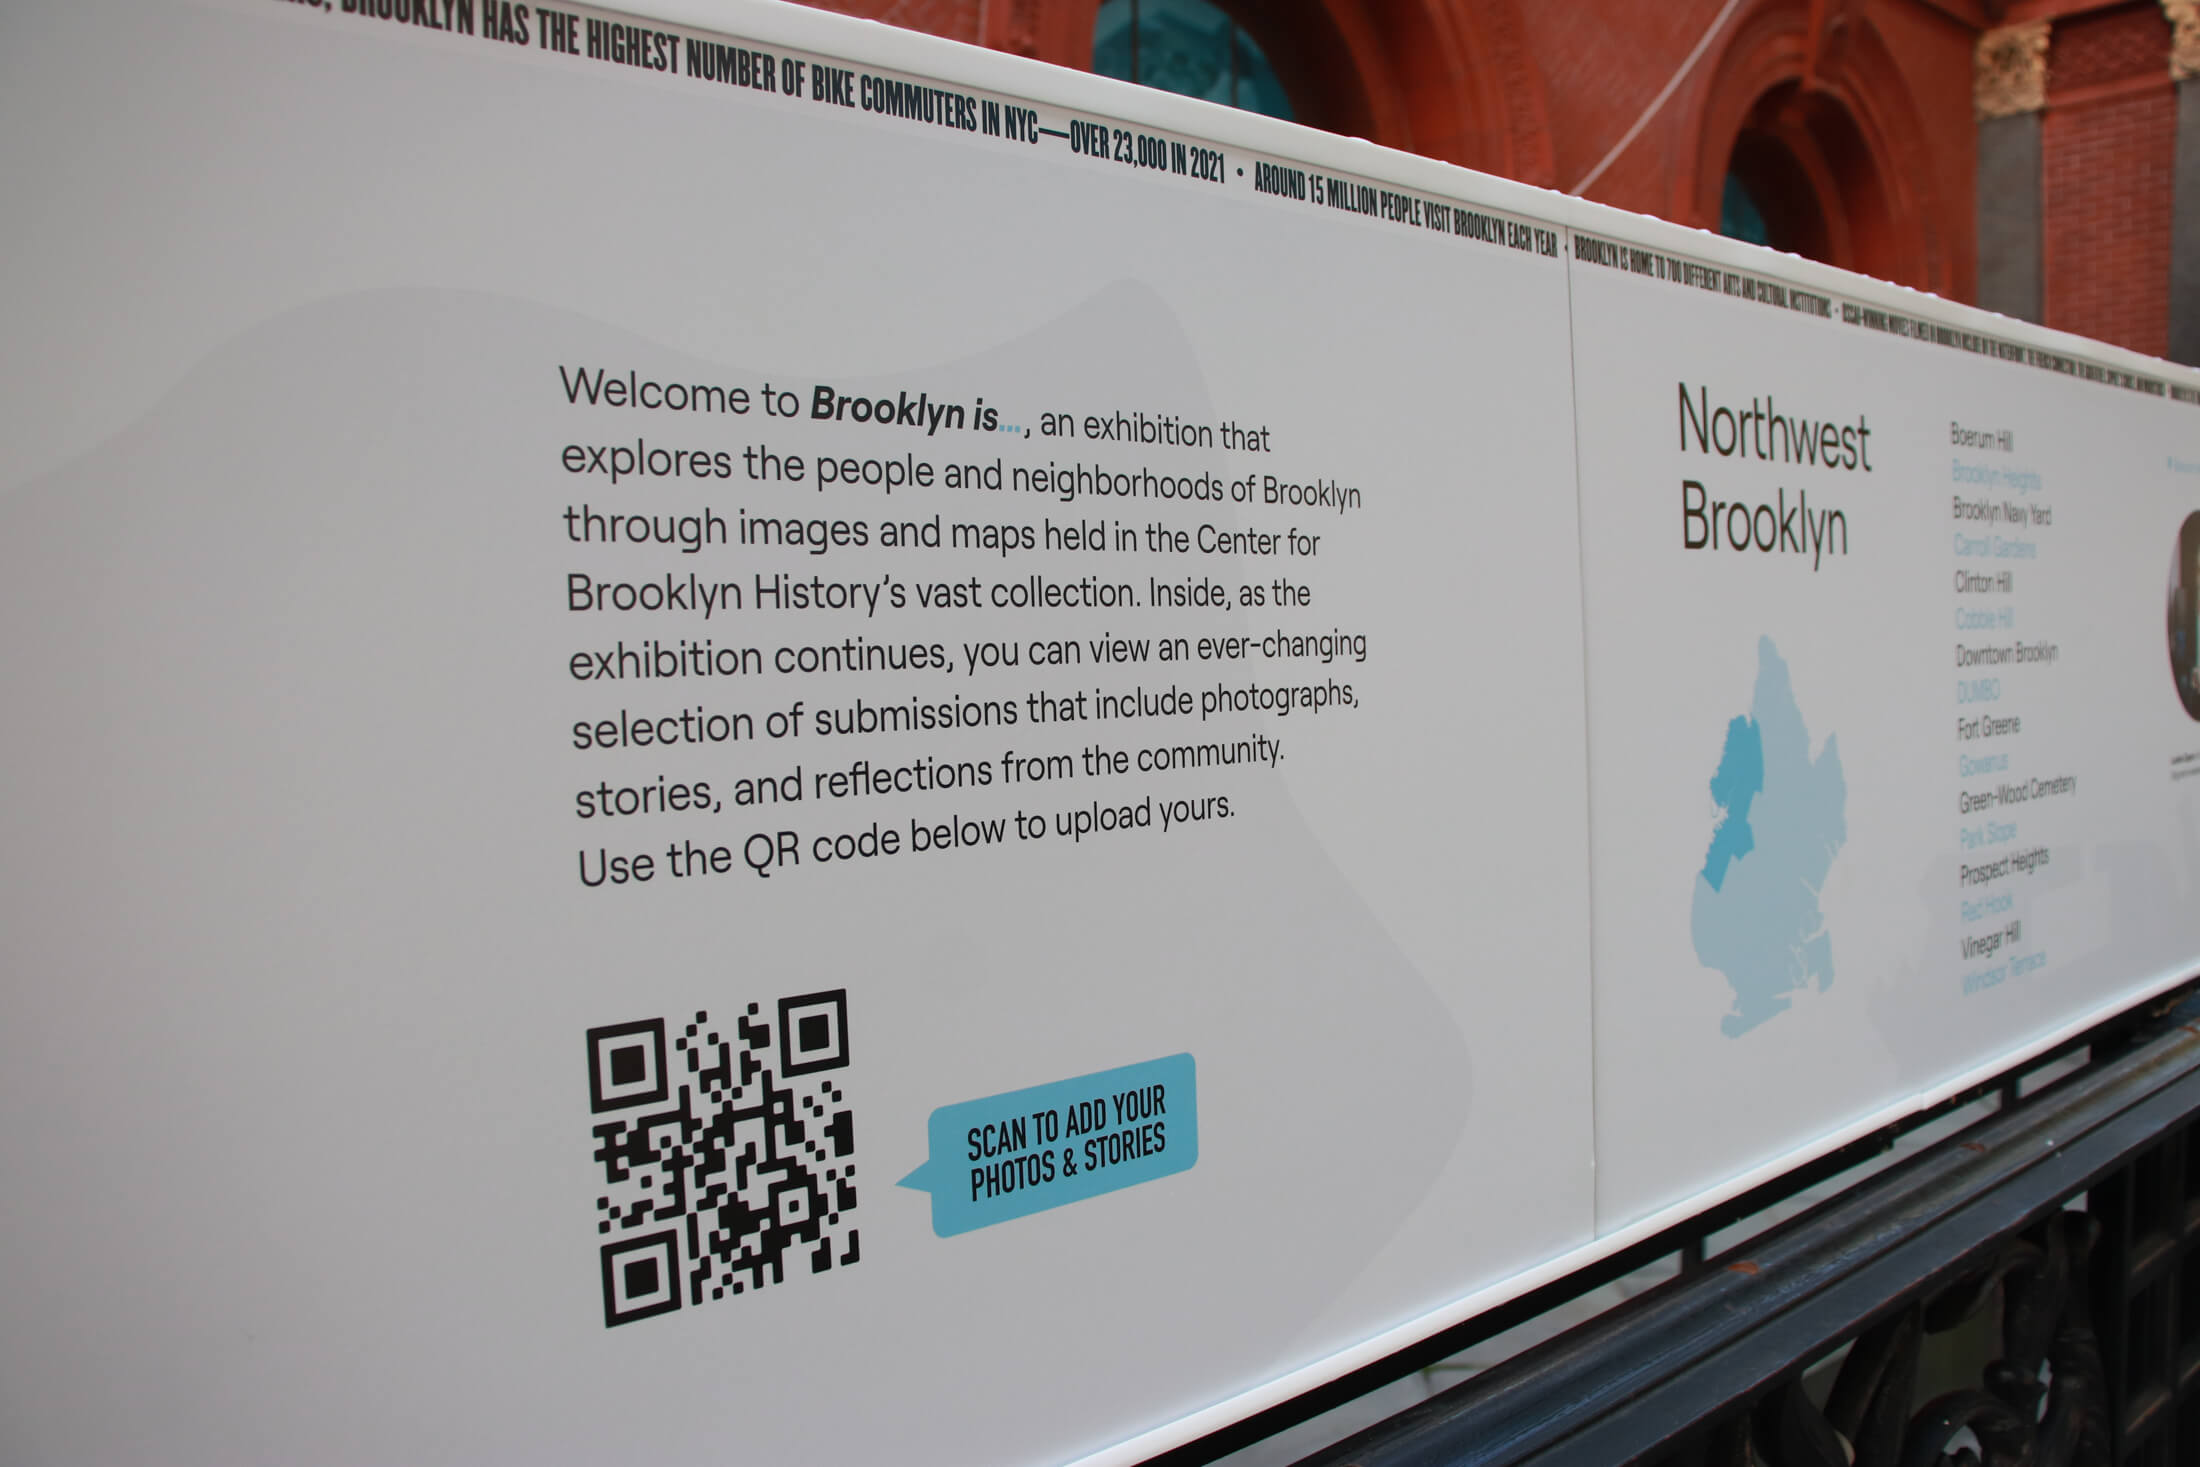 exhibit on the fence includes a QR code for people to add their own photos and stories